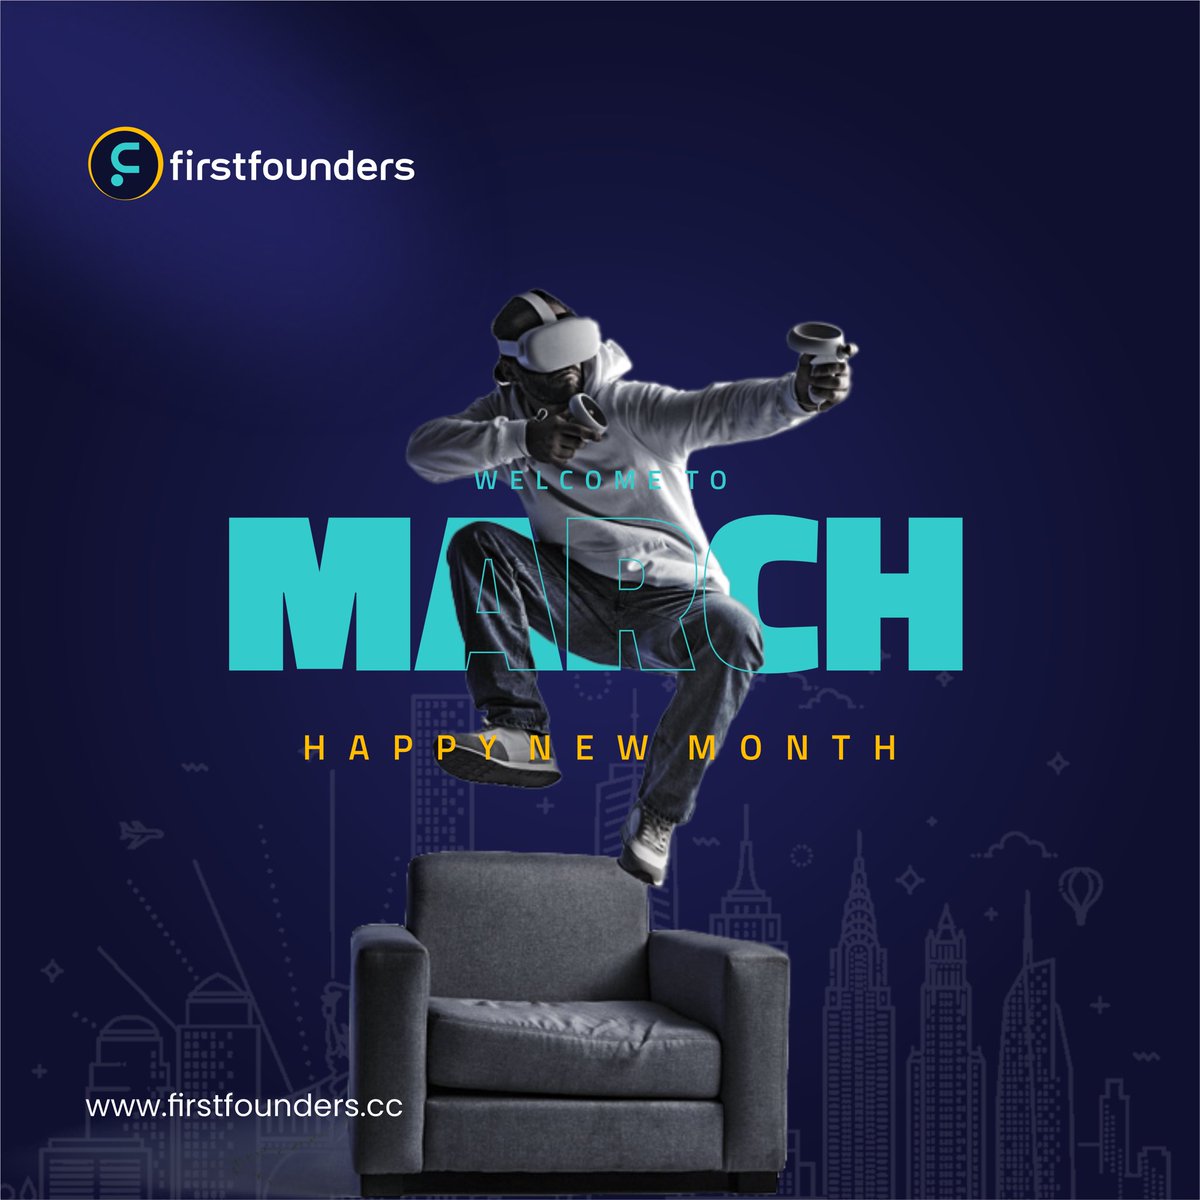 Happy new month of March everyone!!